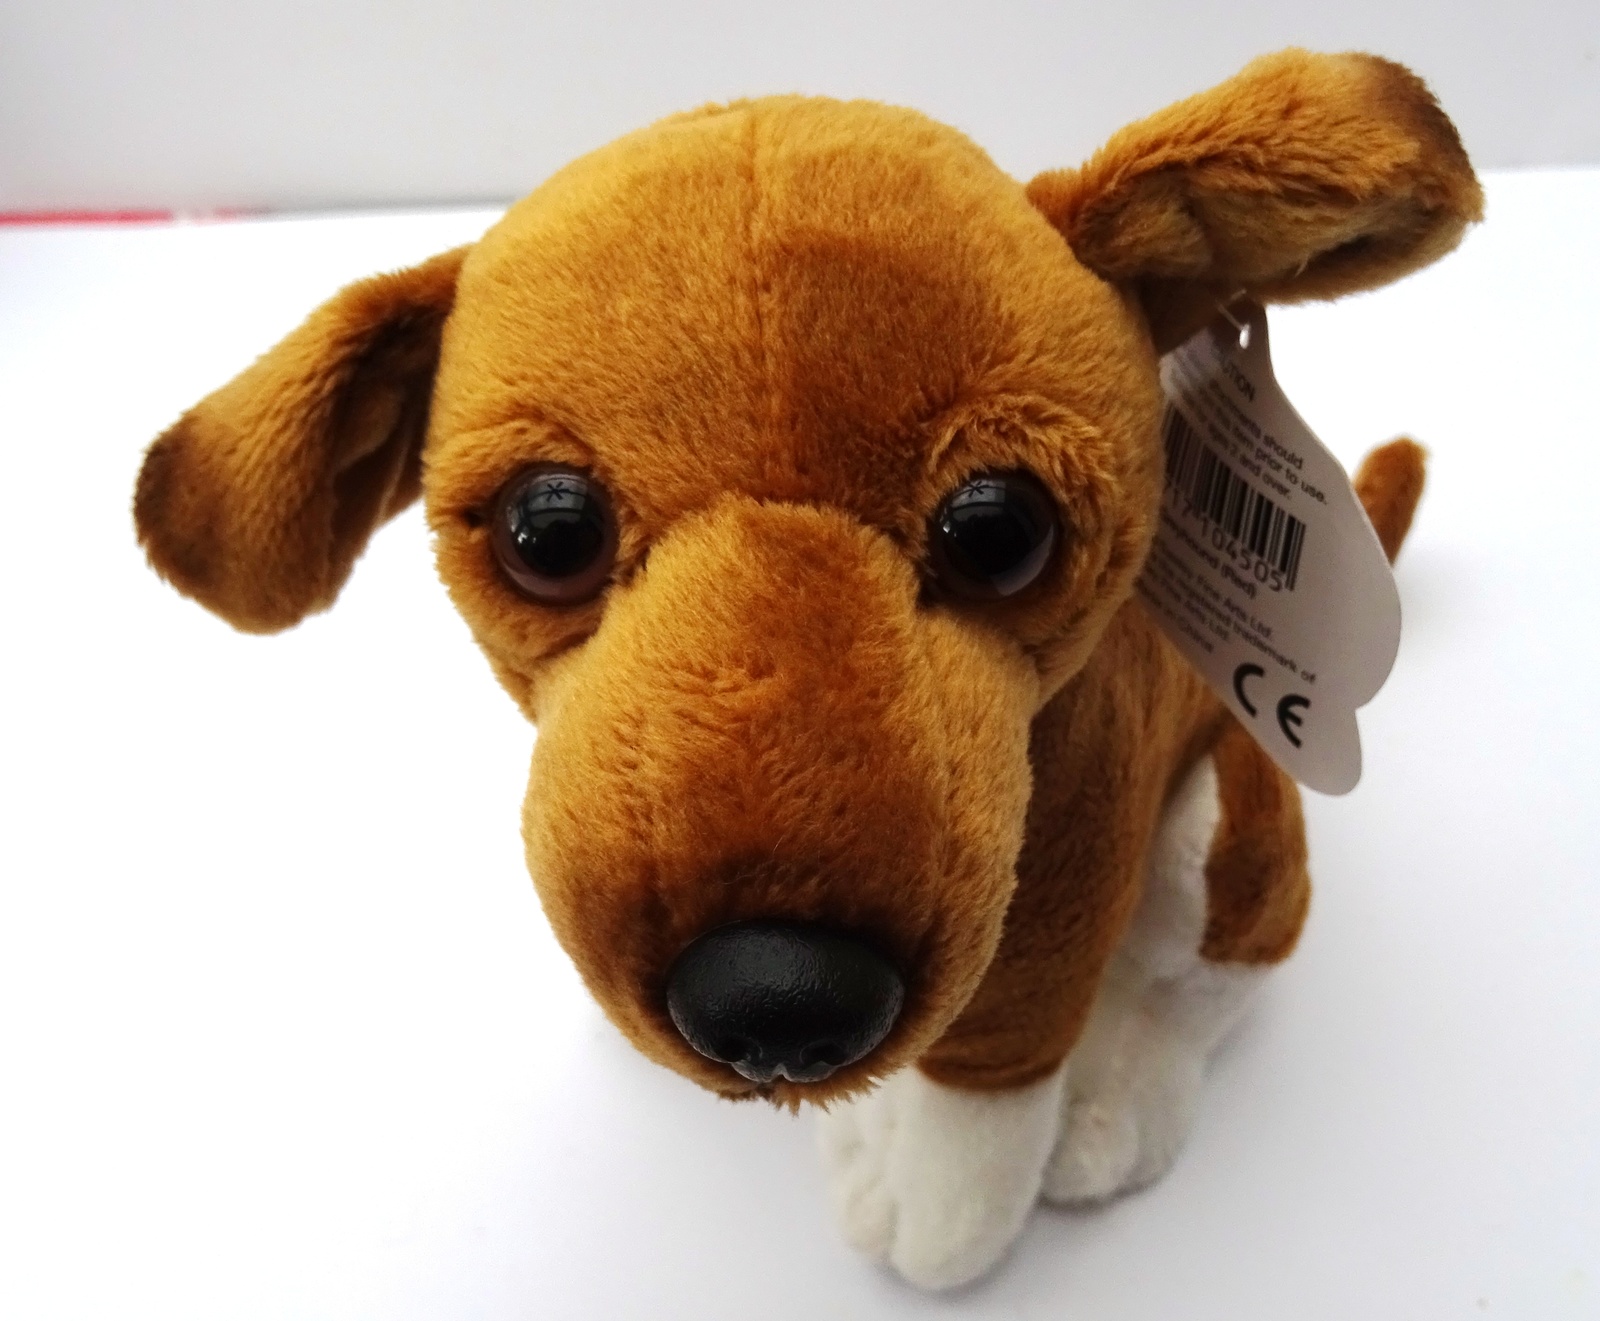 Greyhound 12" toy dog  gift wrapped or not with personalised tag or not - $40.00 - $50.00